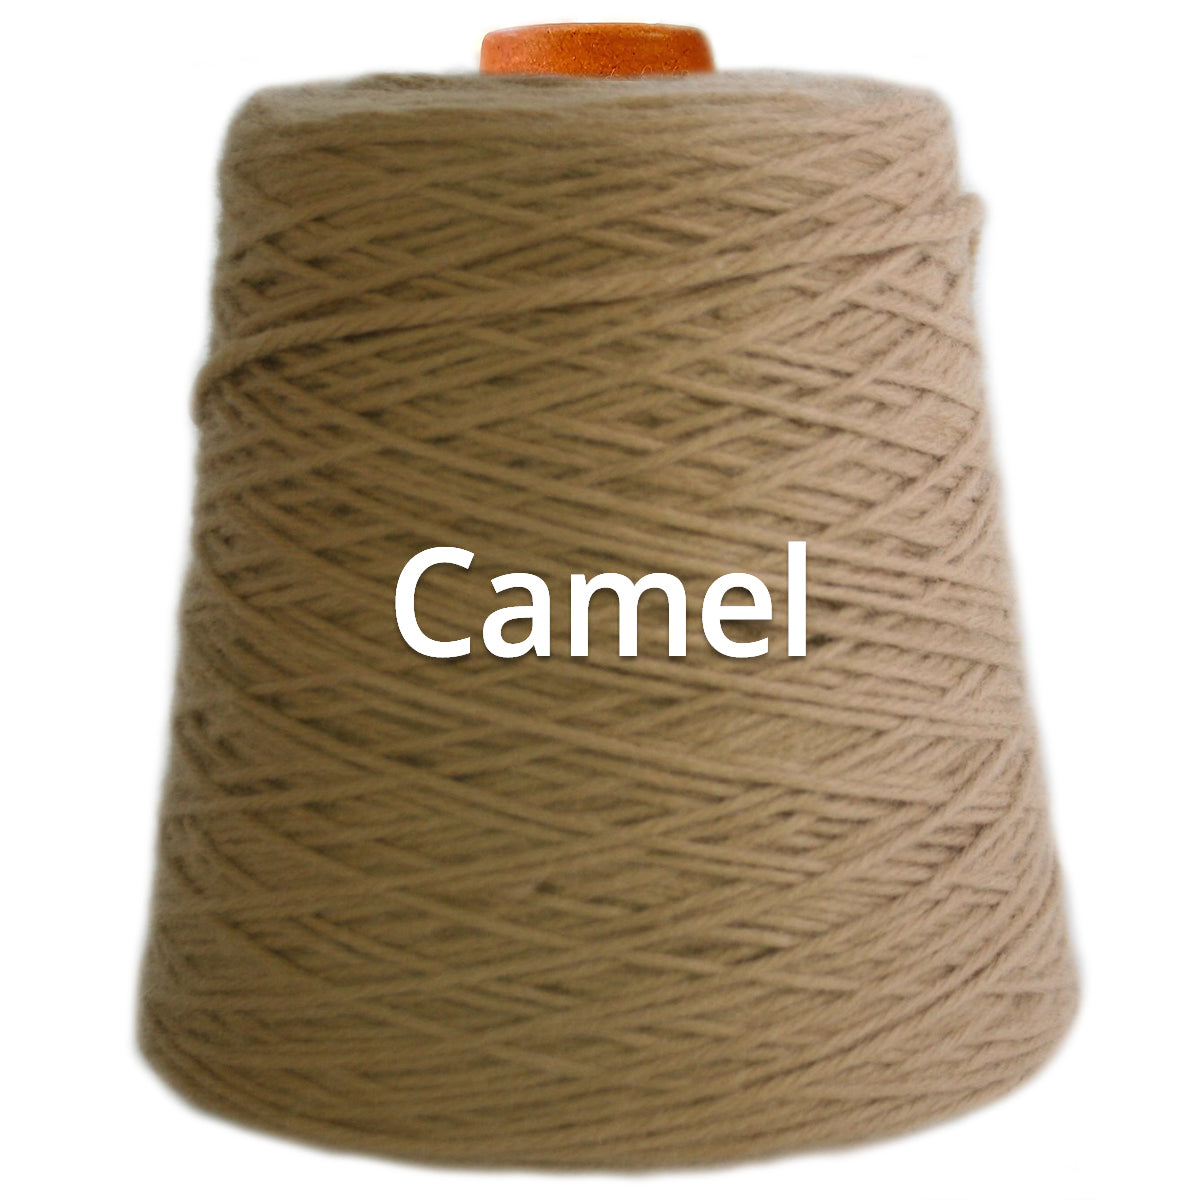 Camel - Nundle Collection - 4 Ply Sock Yarn 400g Cone